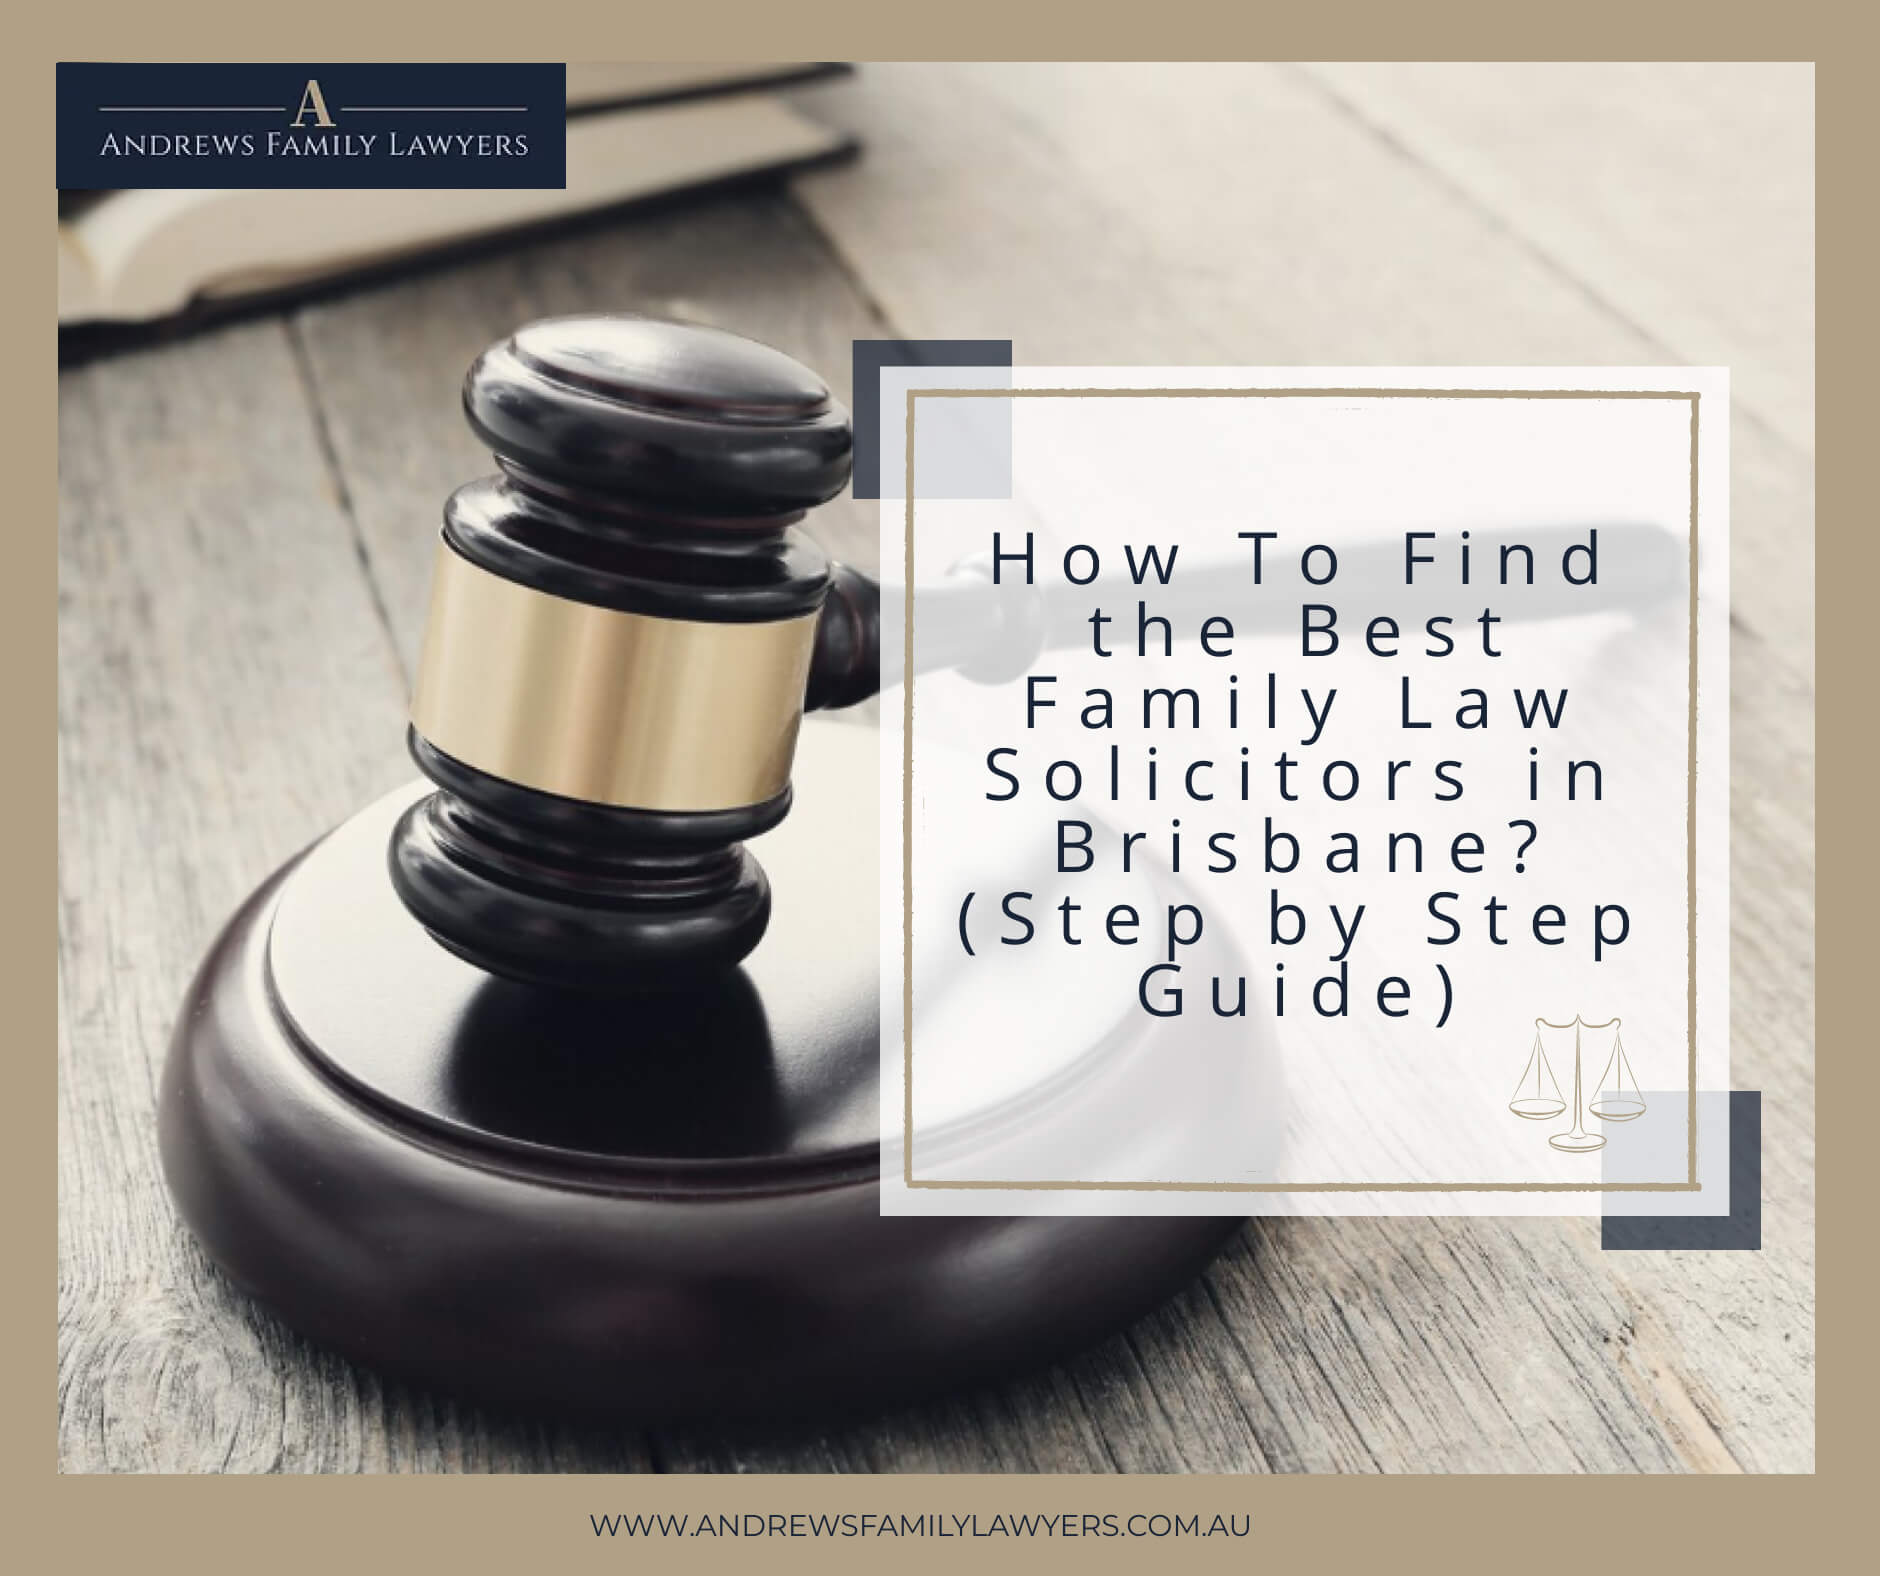 How To Find the Best Family Law Solicitors in Brisbane? (Step by Step Guide)